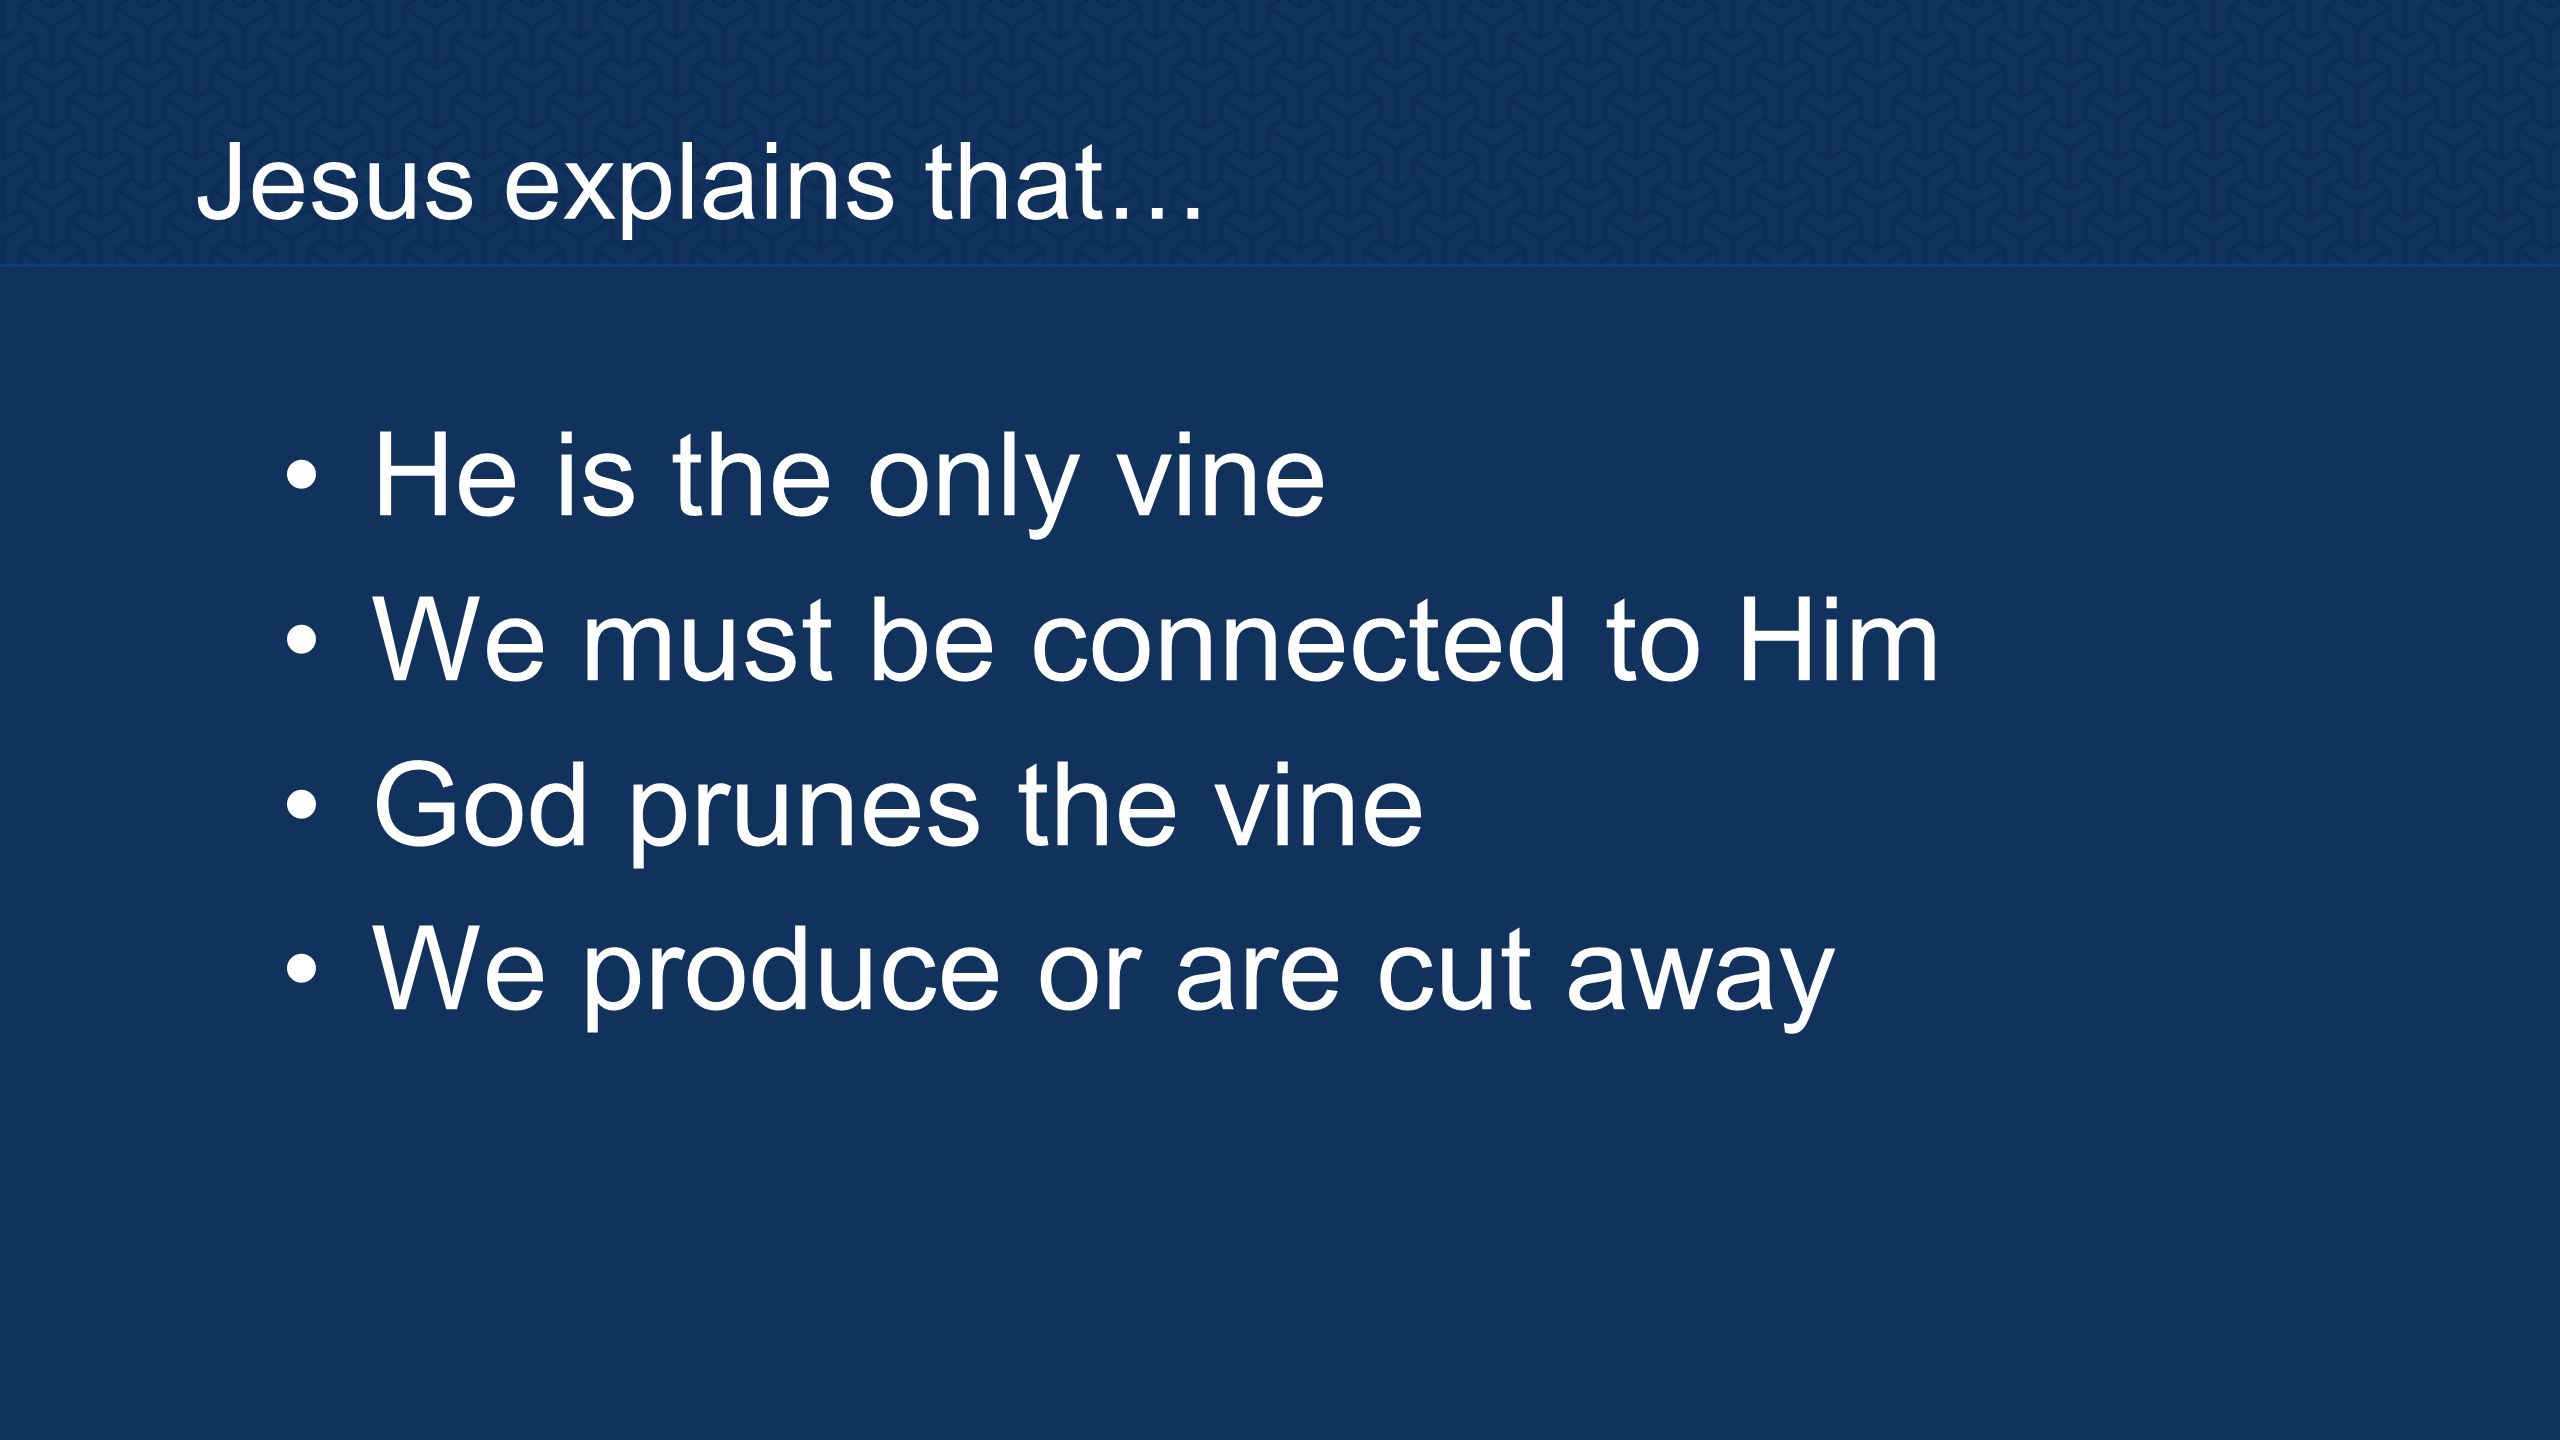 Jesus explains that… He is the only vine We must be connected to Him God prunes the vine We produce or are cut away